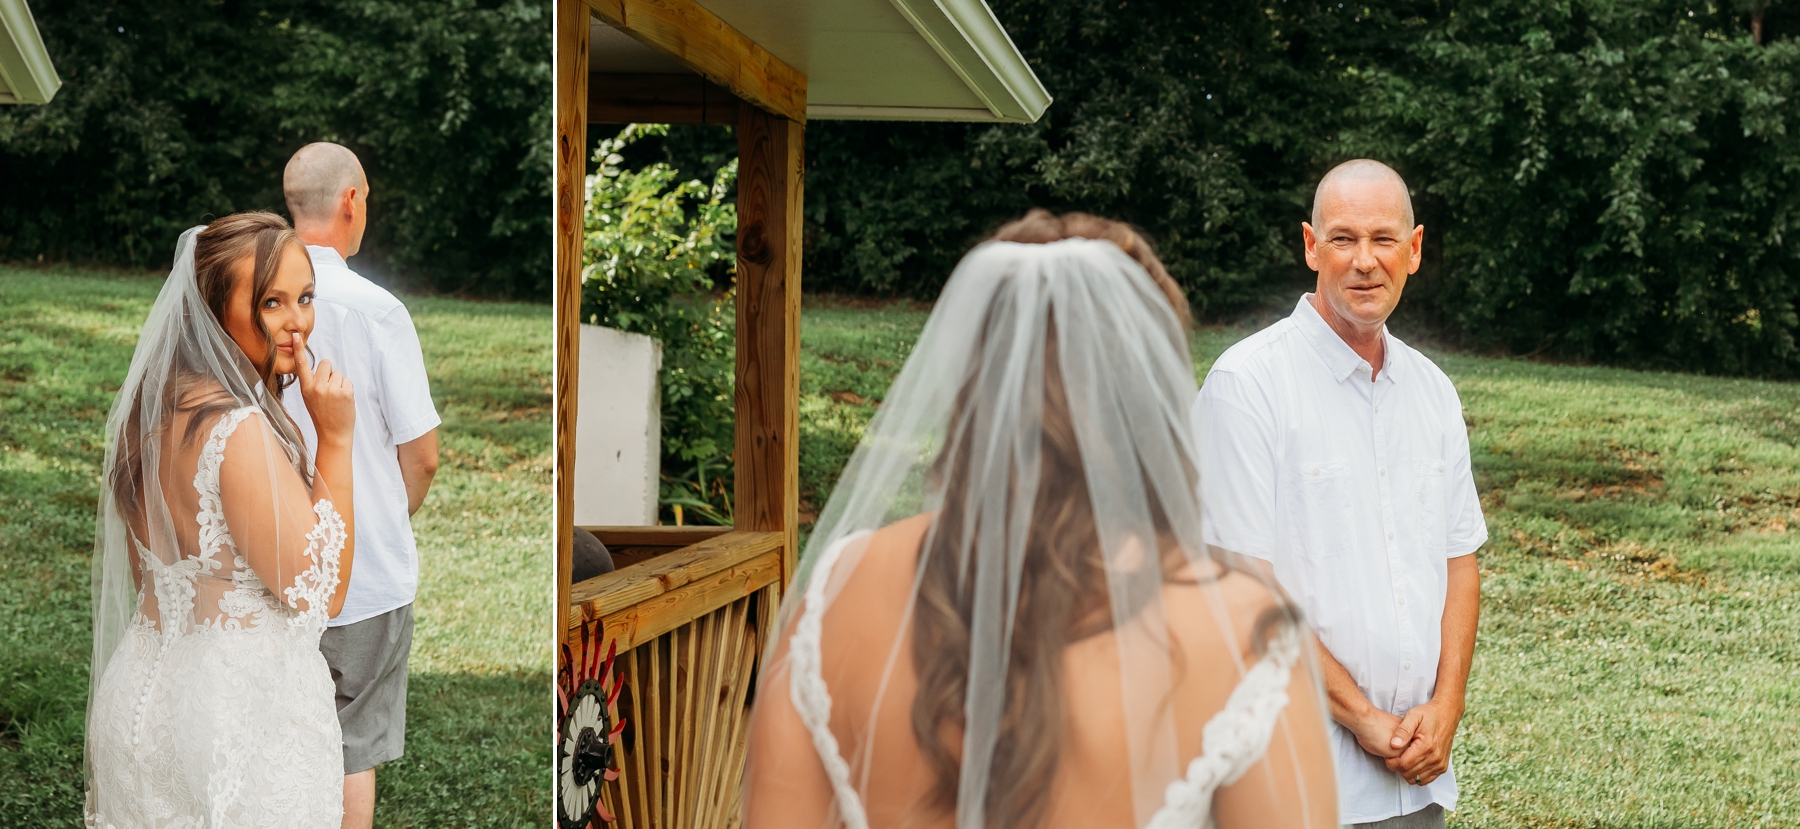 backyard wedding photography bates city missouri bride and groom brittany jewell photography father daughter first look